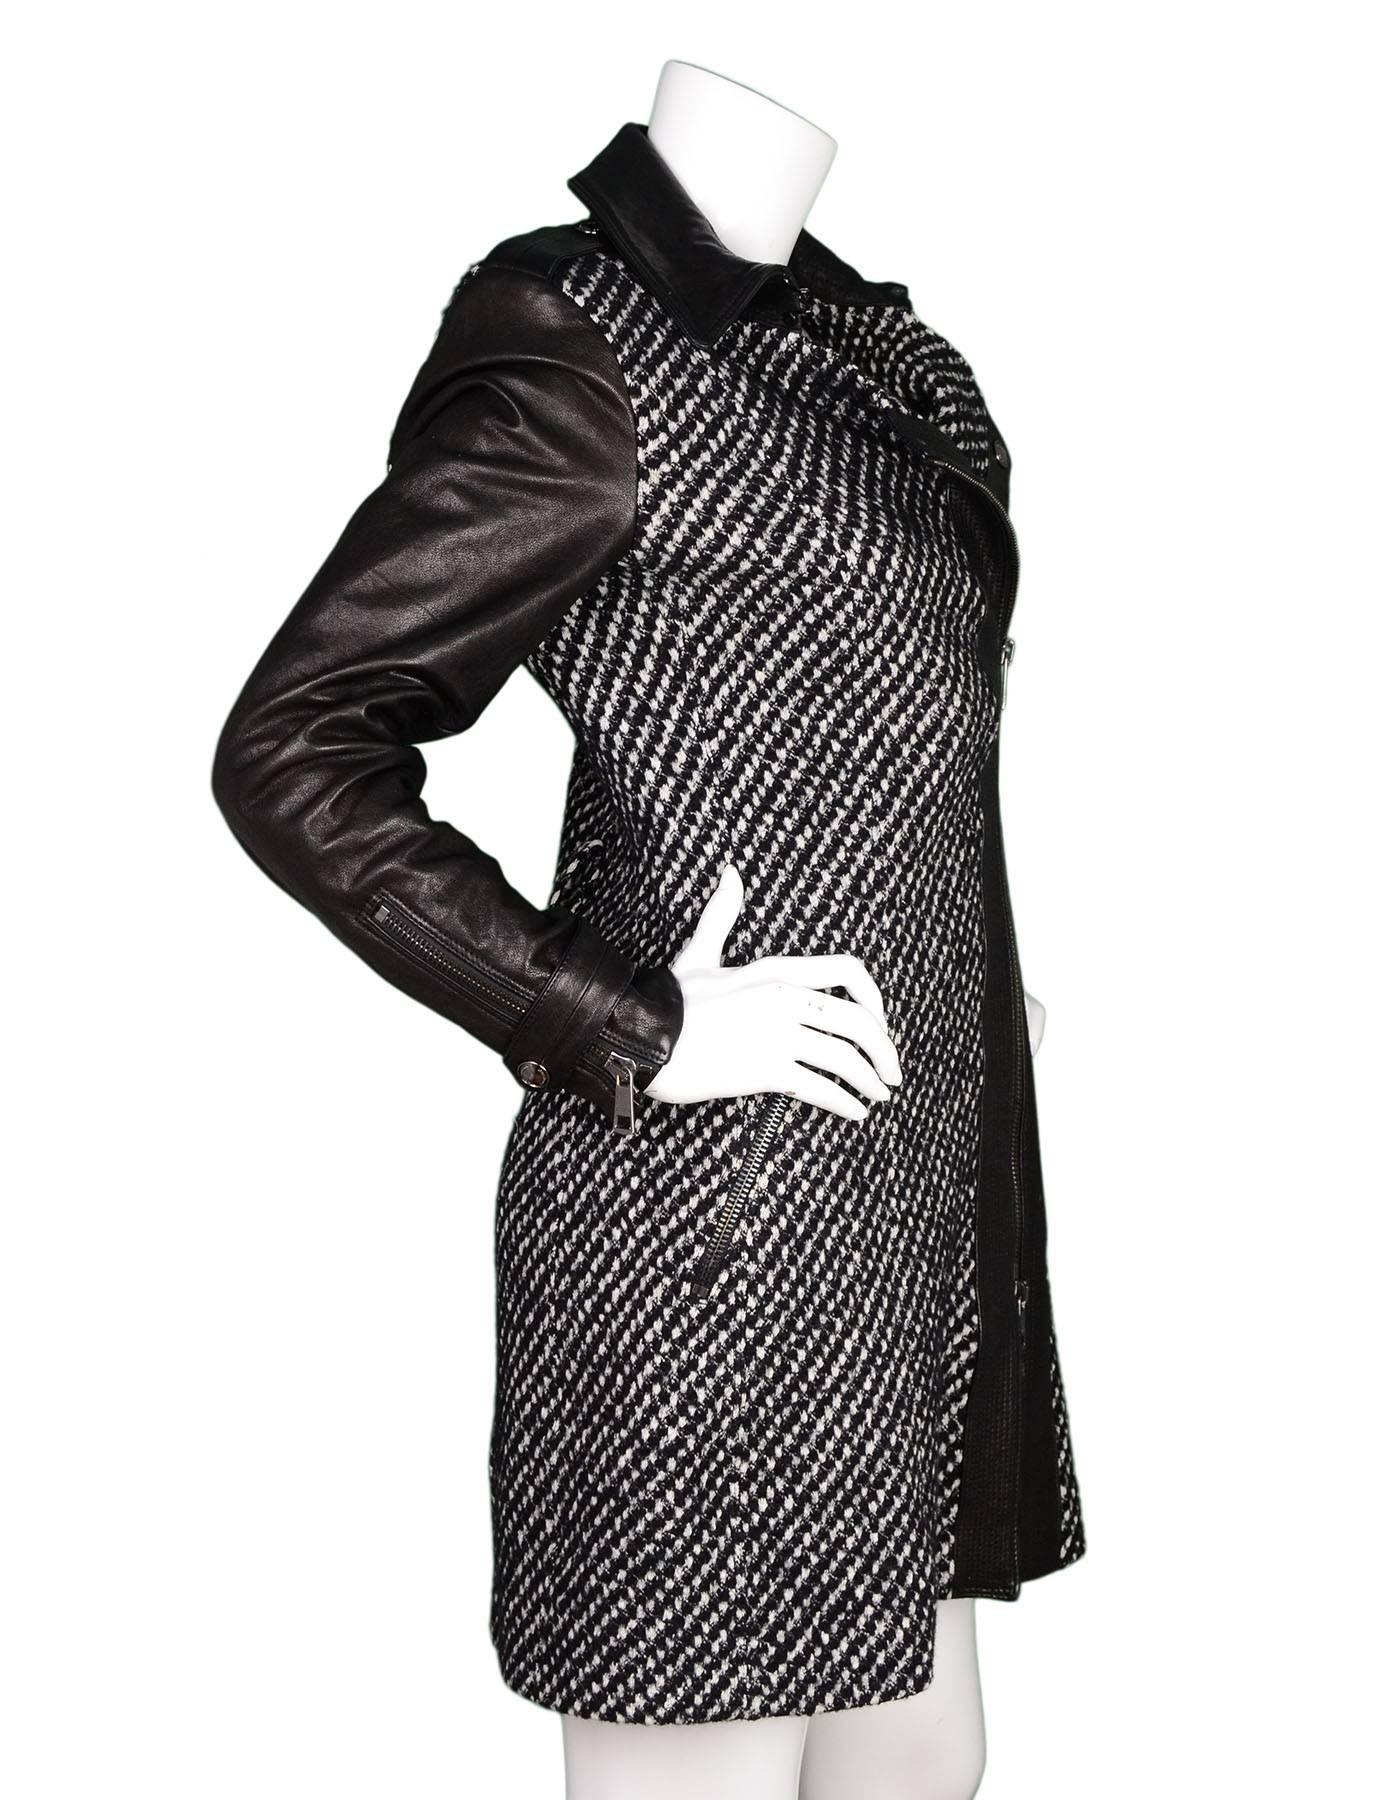 Burberry London Houndstooth & Leather Long Coat 
Features asymmetric zip up front detail.  
**Please note this coat is missing its belt**

Made In: Hungary
Color: Black and white
Composition: Leather trim, houdstooth- 60% wool, 40%